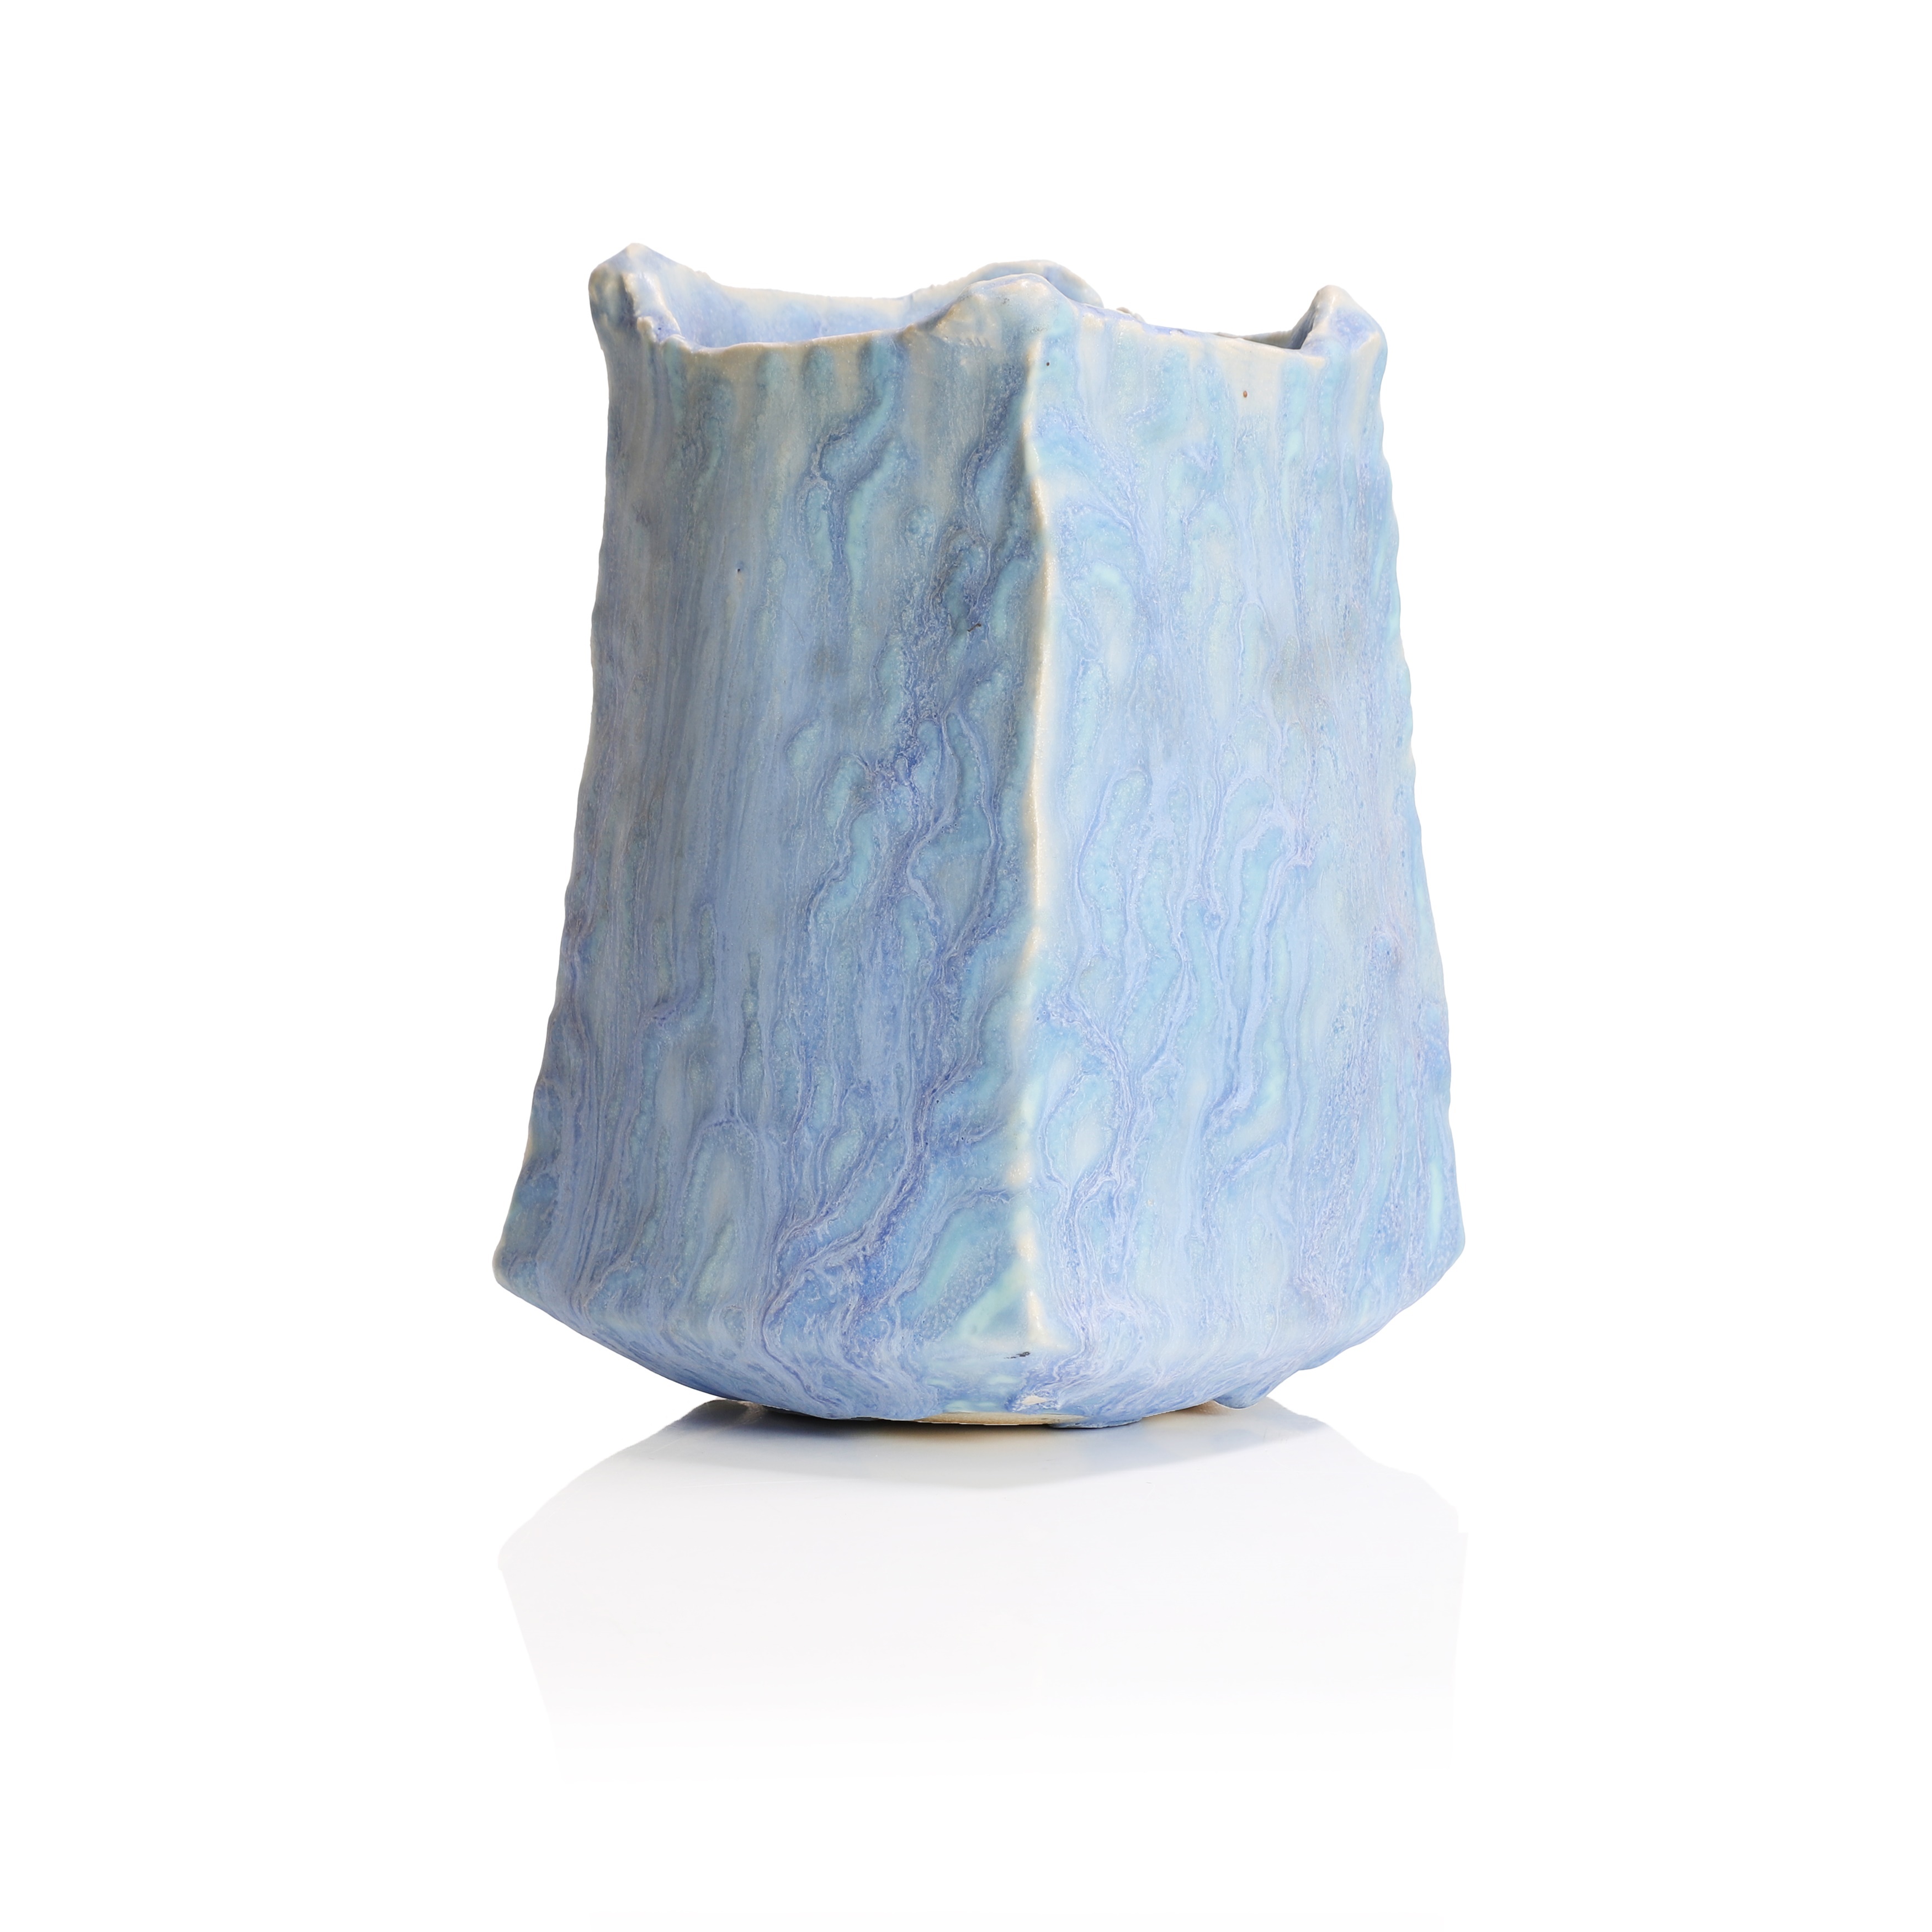 Peter Beard (b.1951) a stoneware vessel, of square sleeve form, with a textured blue glaze, impressed marks, 20.5cm high (£200-400)